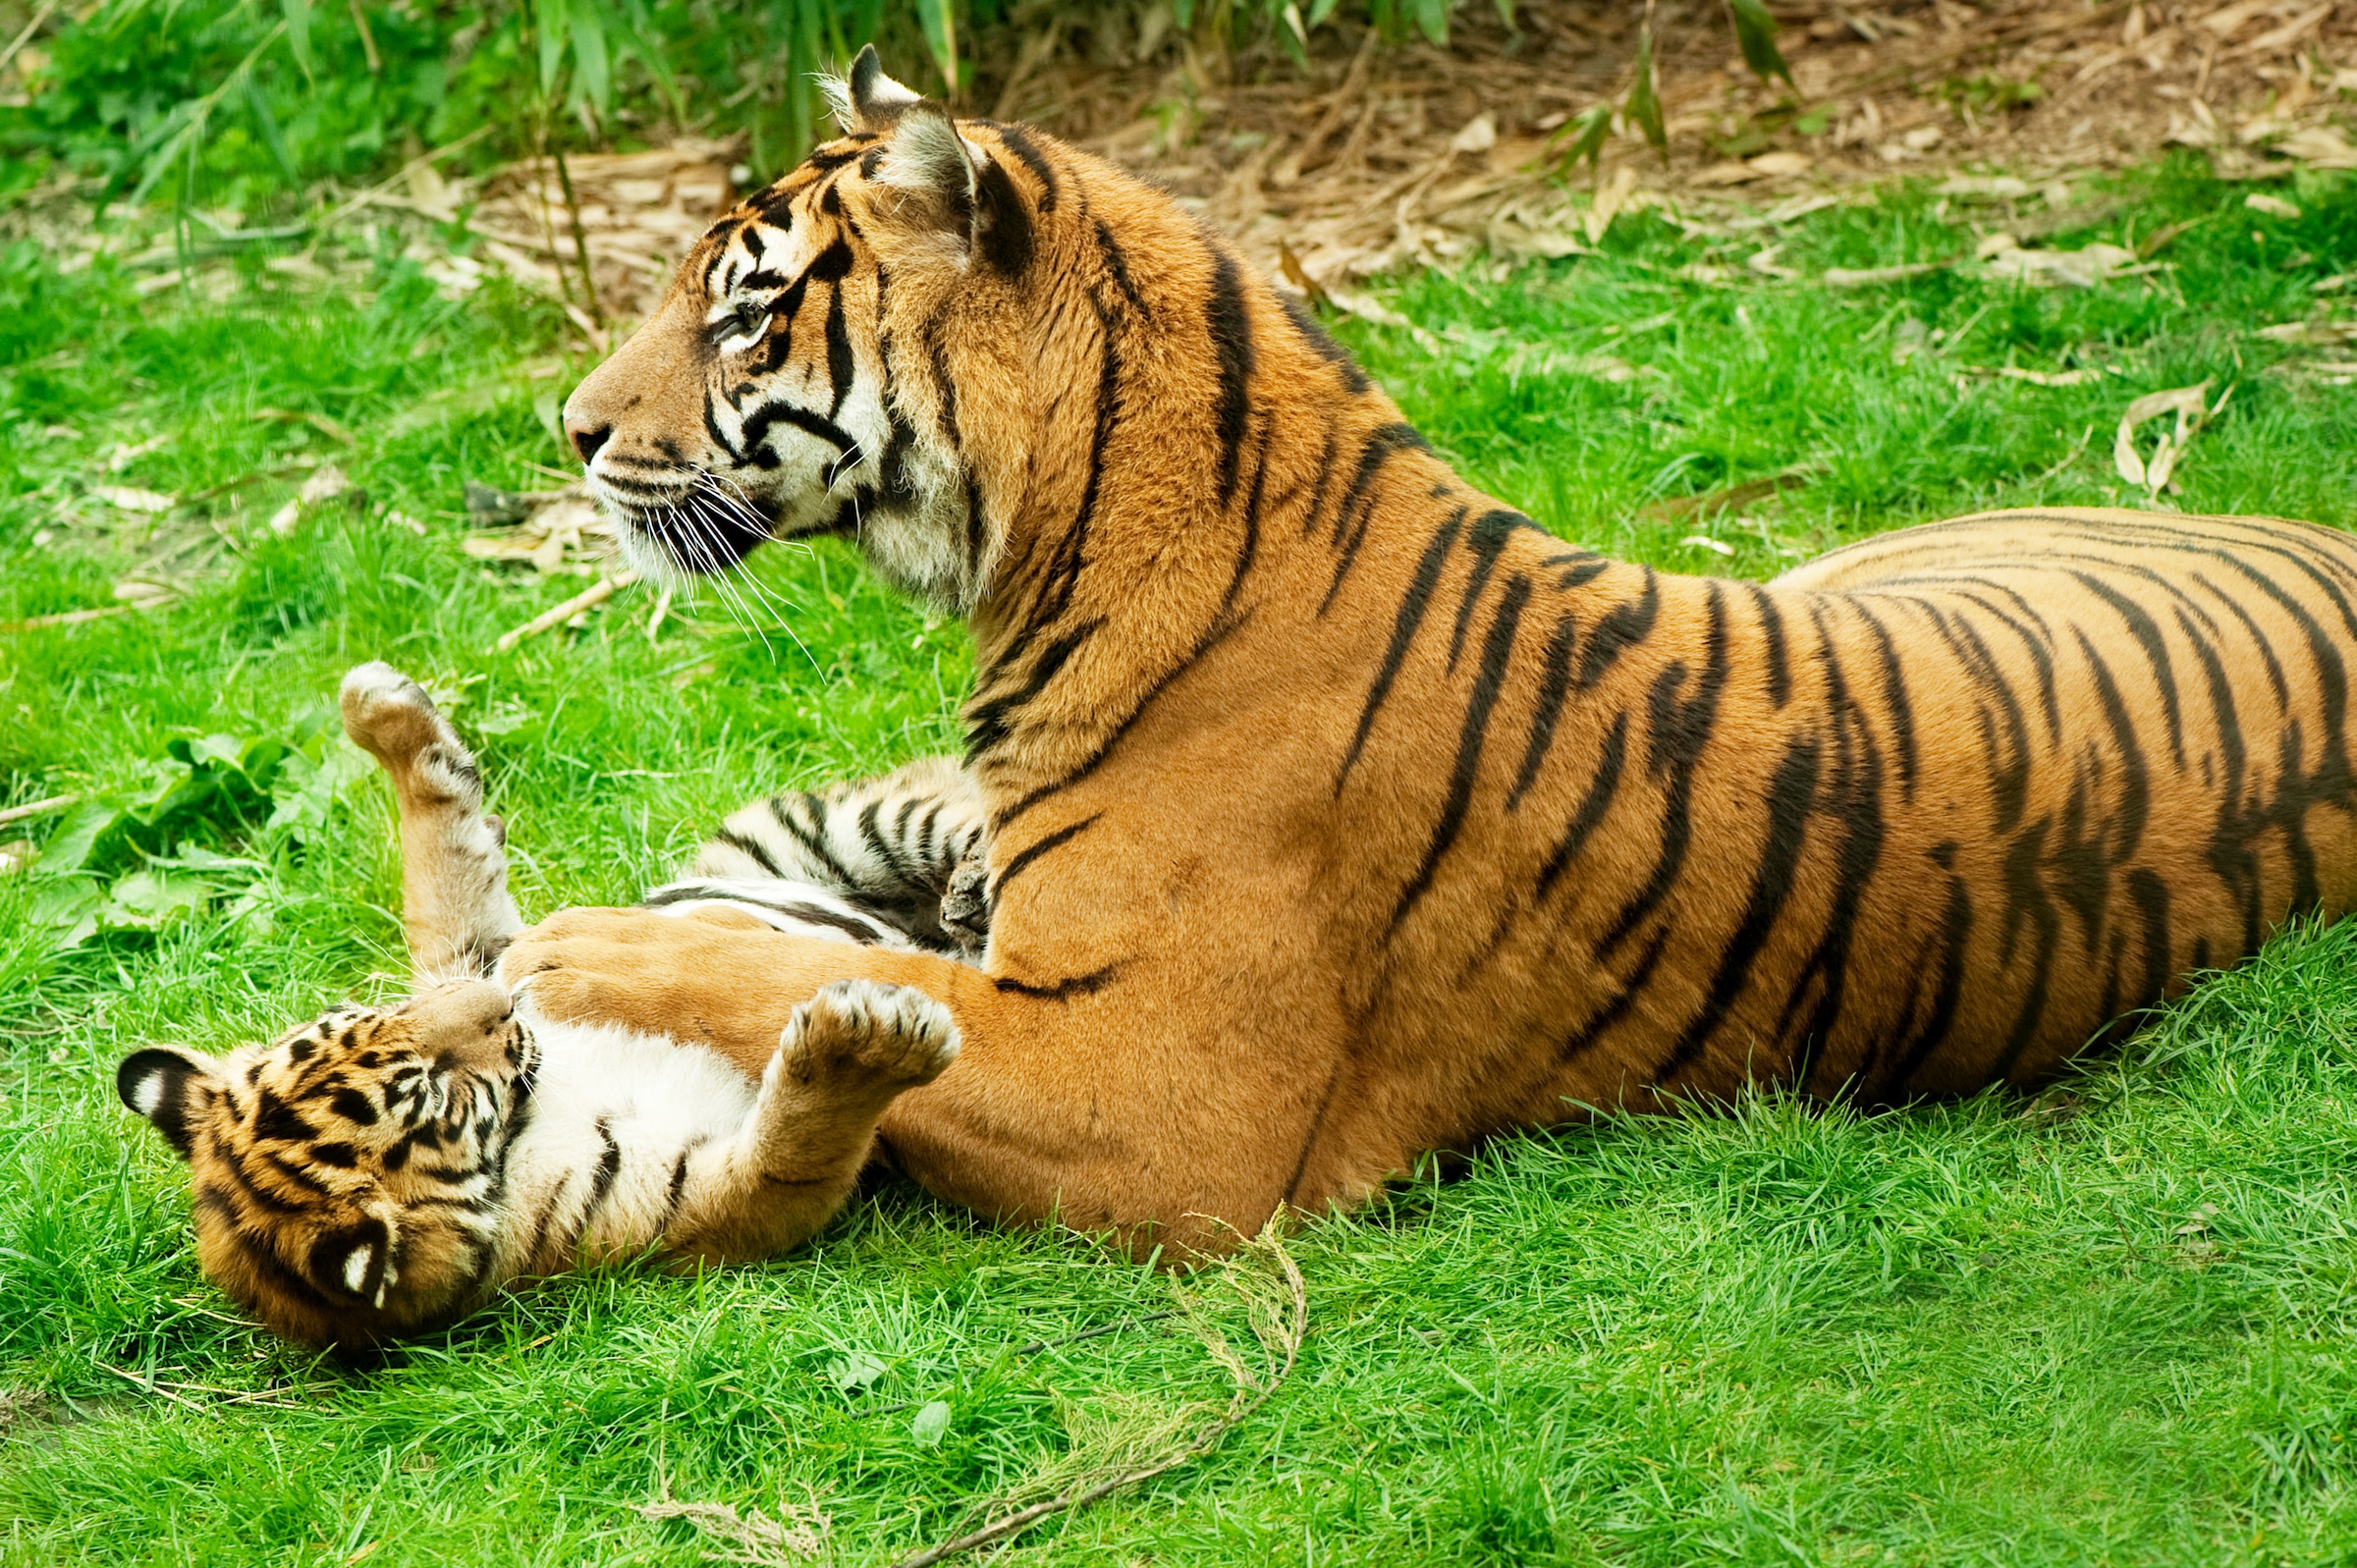 Fototapete »Tiger with Baby«